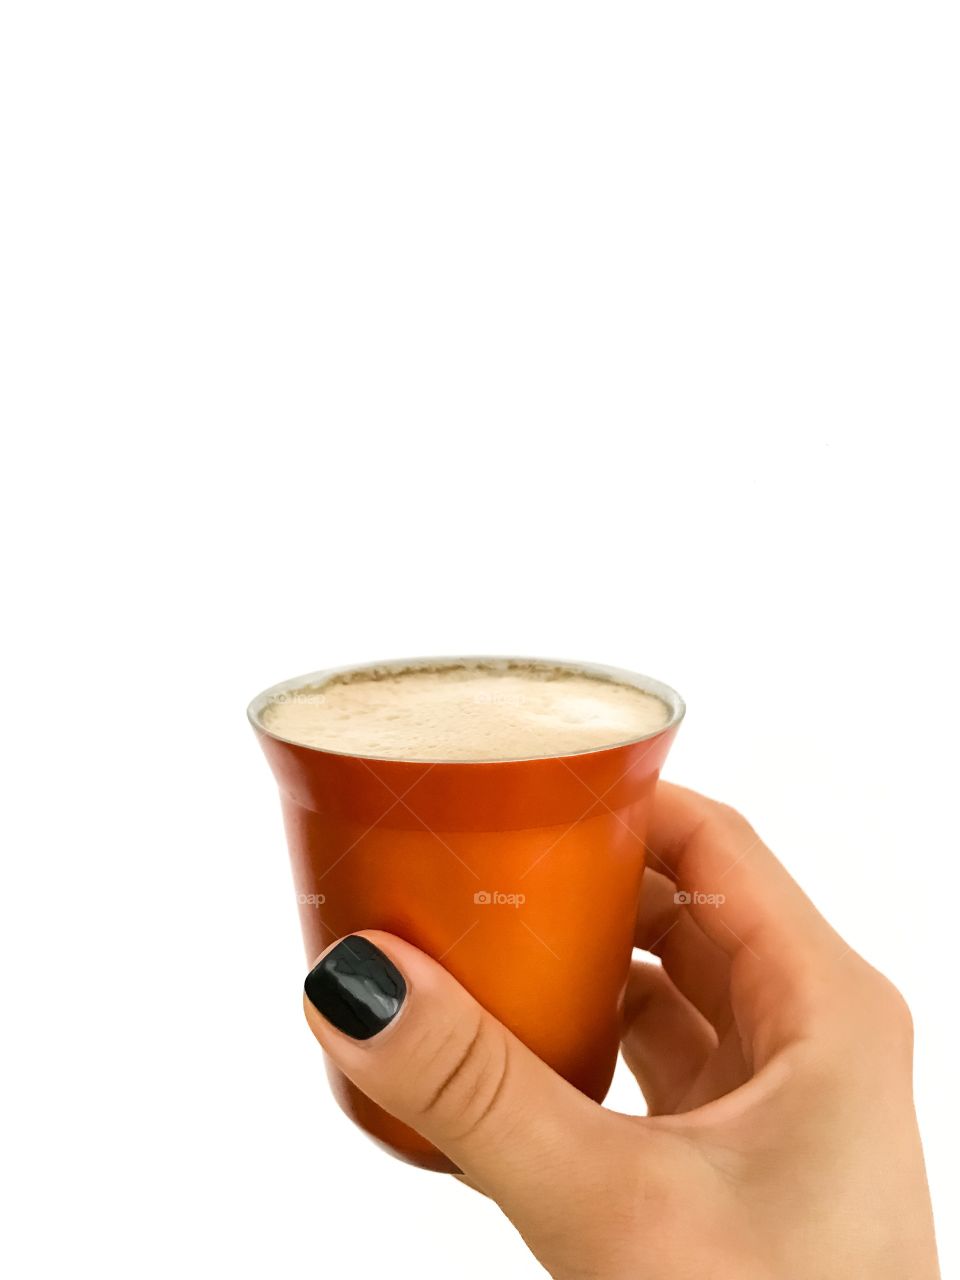 Nespresso moments: a hand holding a cup of morning coffee 